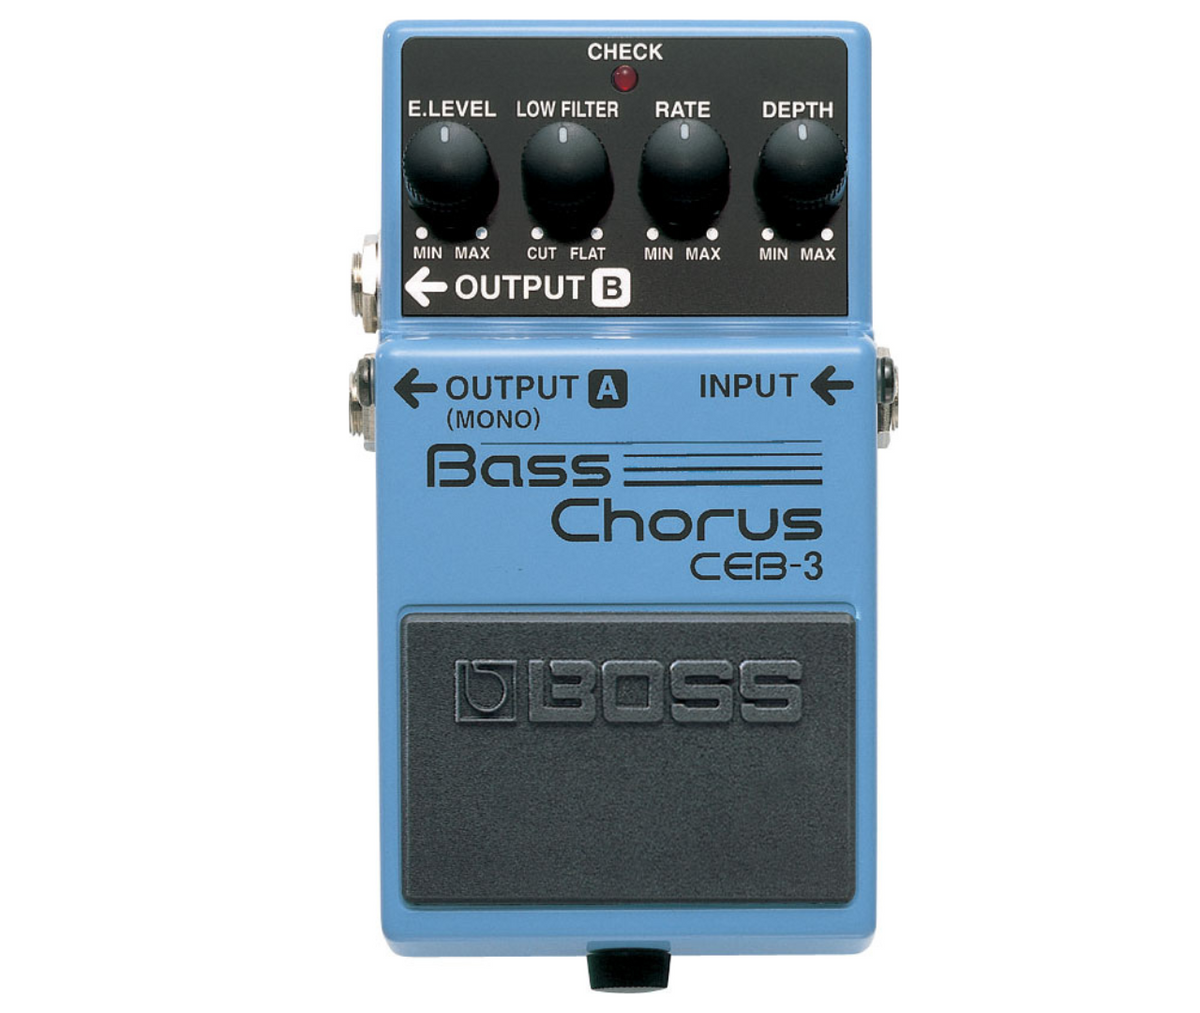 BOSS CEB-3 Bass Chorus Best Guitar Effects Pedal for Bass with Effect Level, Low Filter, Rate and Depth Knobs